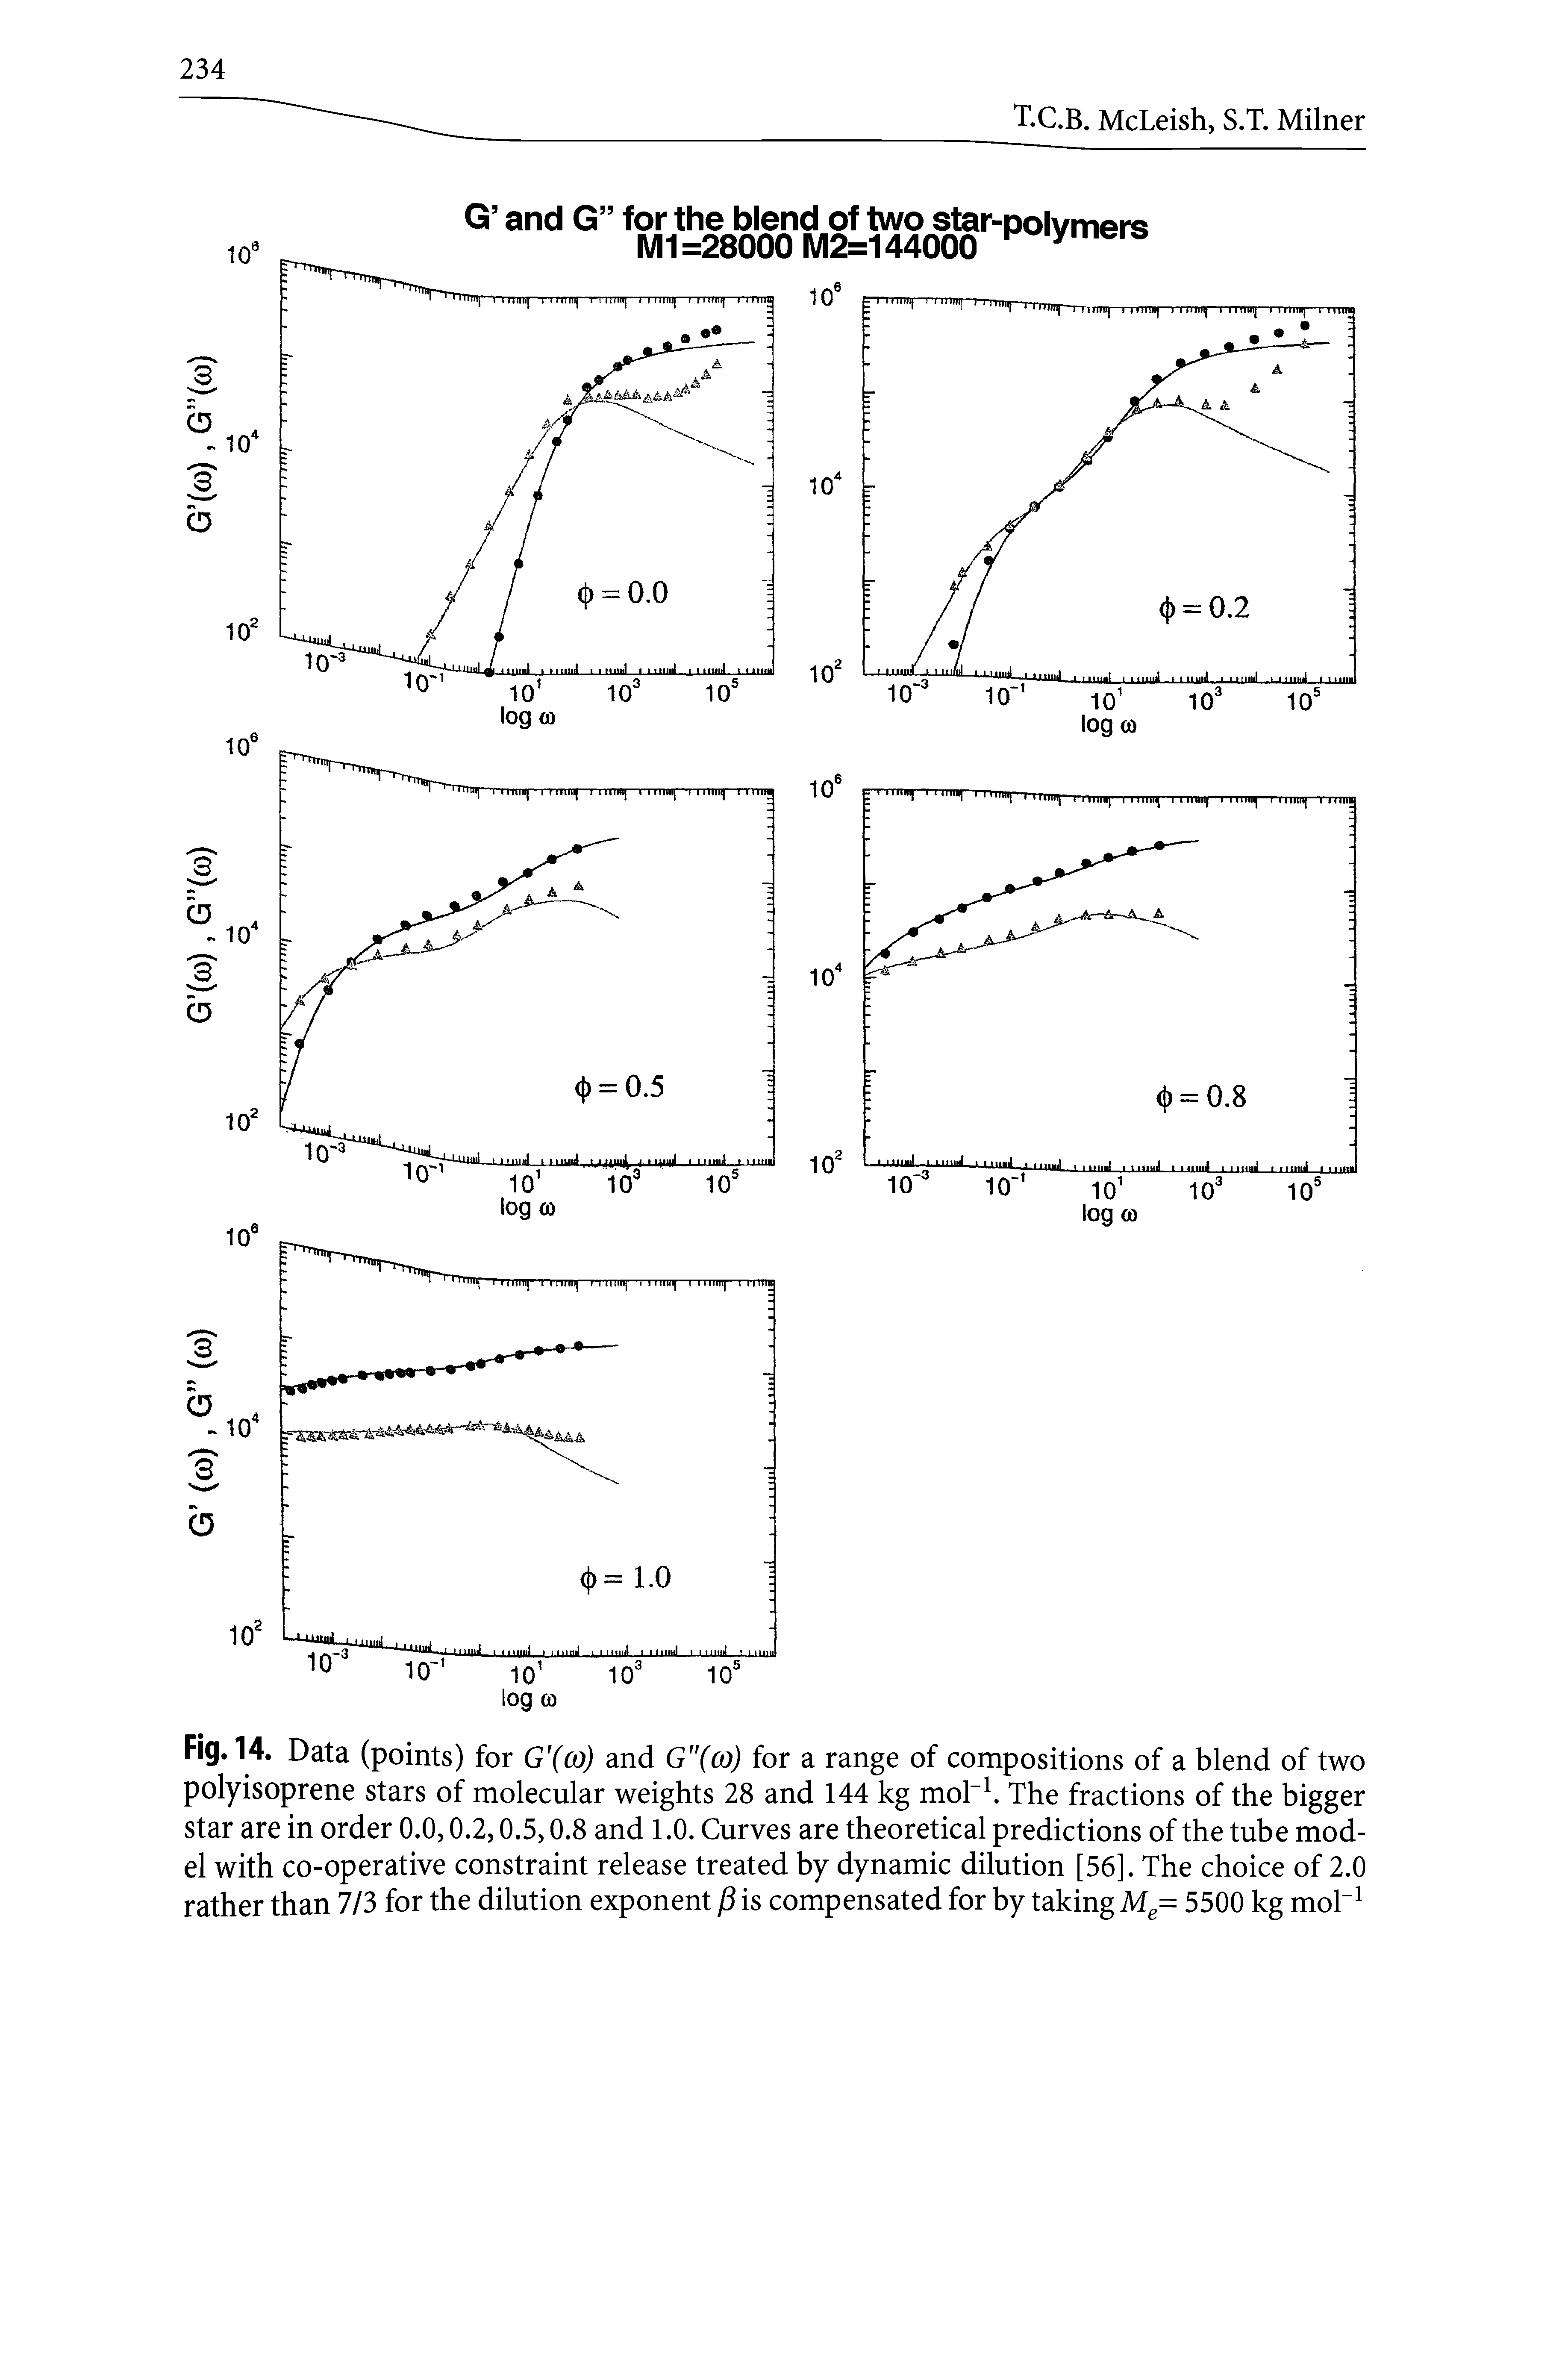 Fig. 14. Data (points) for G (co) and G (co) for a range of compositions of a blend of two polyisoprene stars of molecular weights 28 and 144 kg mol The fractions of the bigger star are in order 0.0,0.2,0.5,0.8 and 1.0. Curves are theoretical predictions of the tube model with co-operative constraint release treated by dynamic dilution [56]. The choice of 2.0 rather than 7/3 for the dilution exponent p is compensated for by taking M = 5500 kg mol" ...